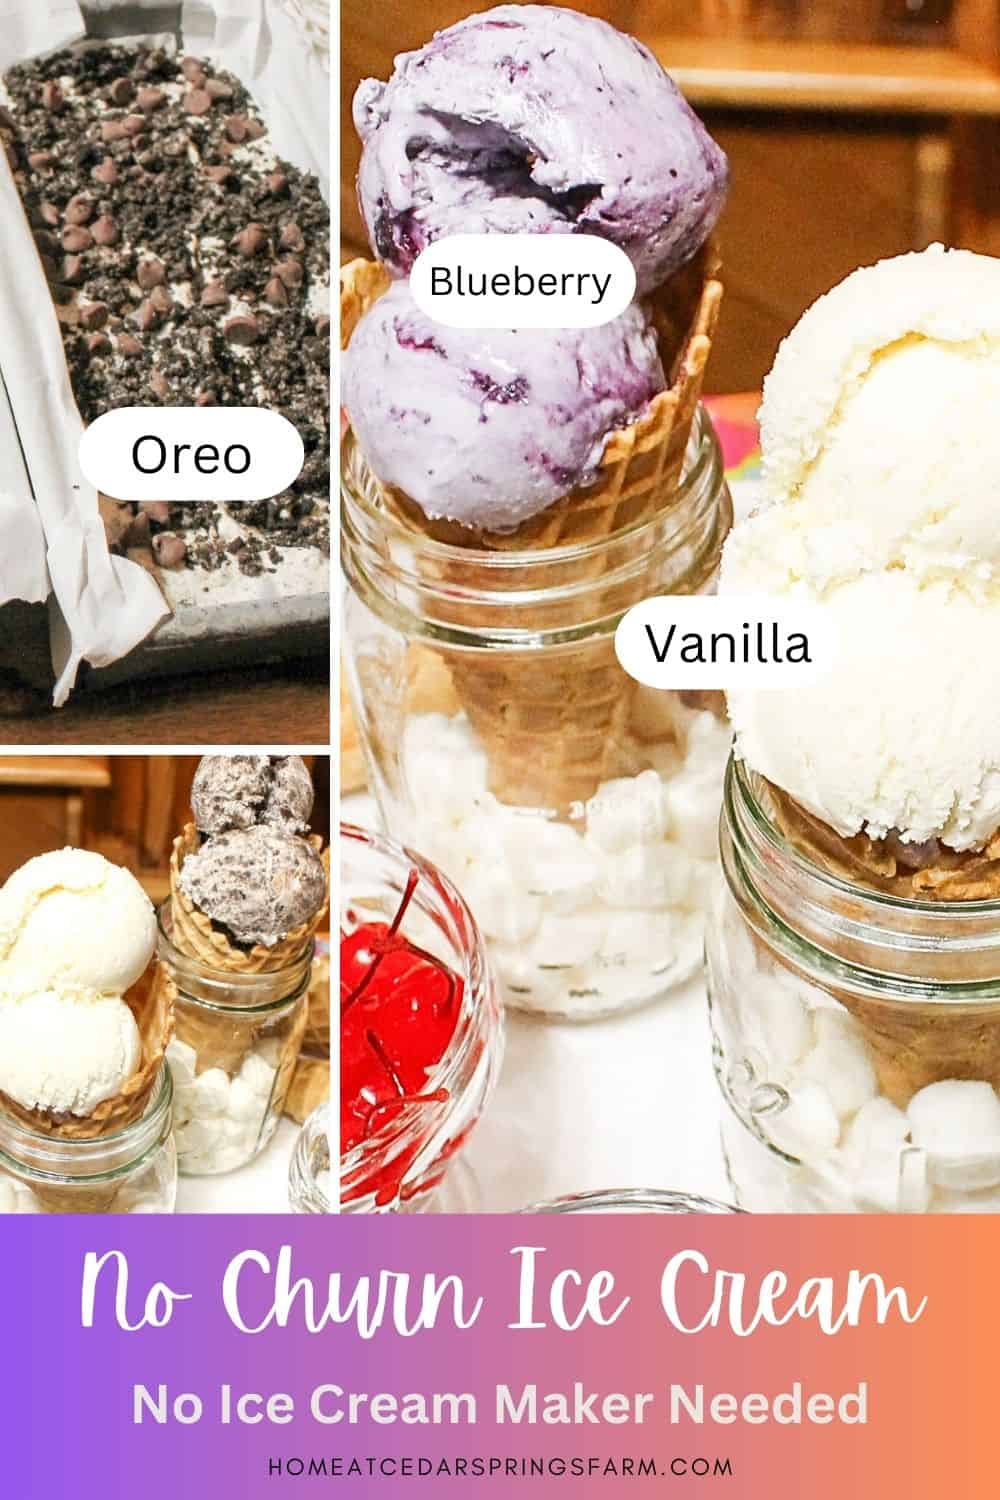 No Churn Ice Cream shown in Oreo, Vanilla, and Blueberry flavors. Pictures are shown in loaf pan, and waffle cones with text overlay.